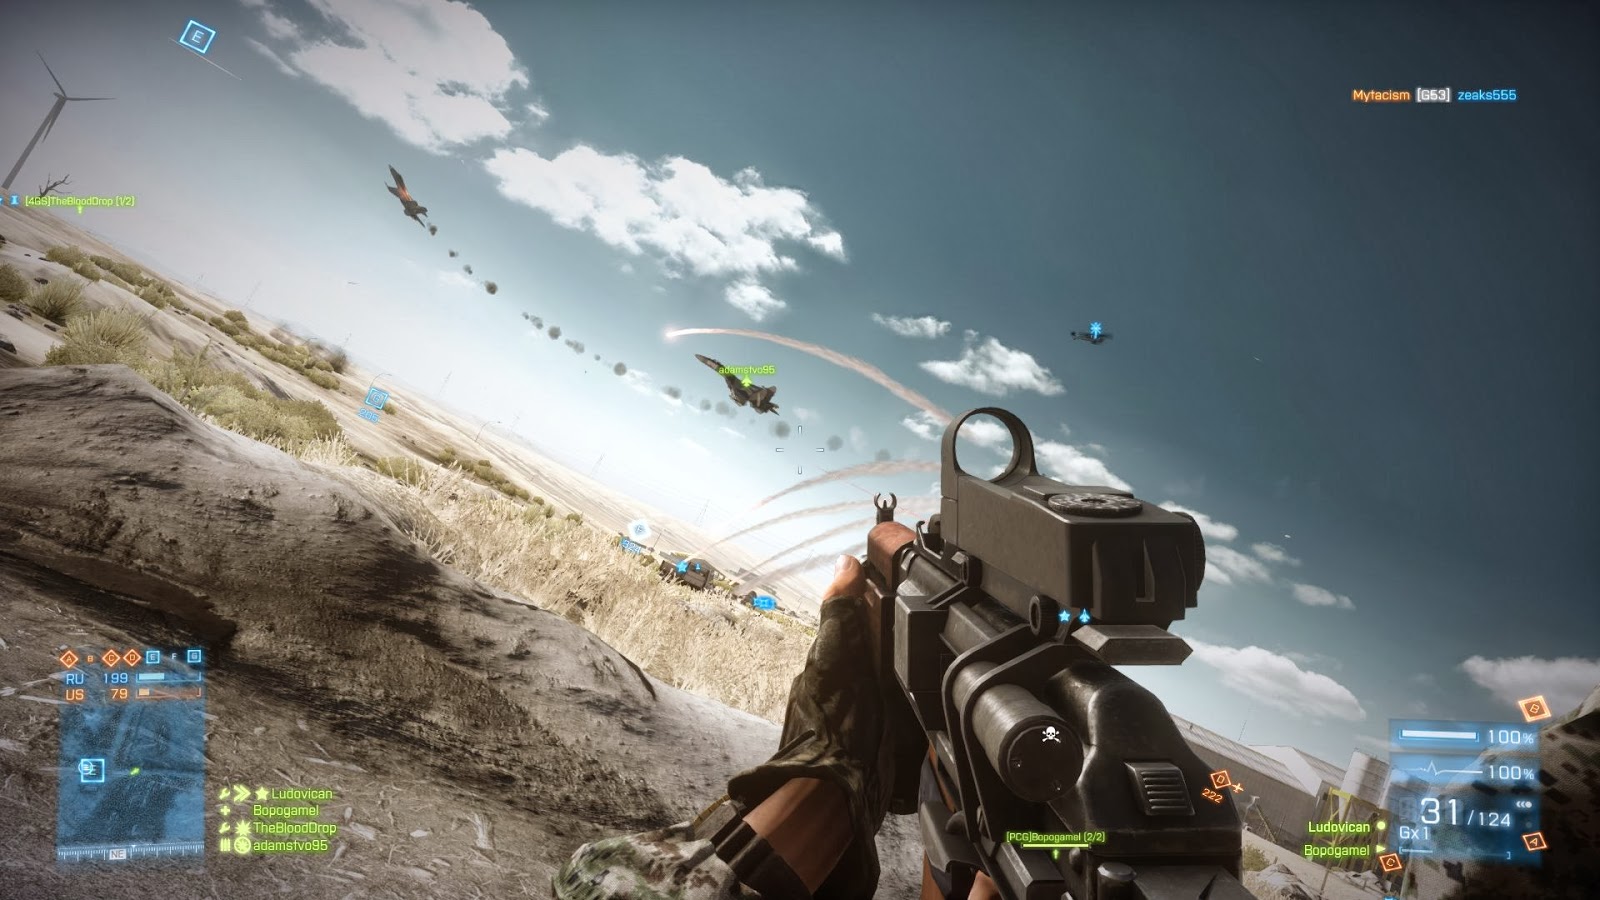 Mediafire PC Games Download: Battlefield 4 Download Mediafire for PC